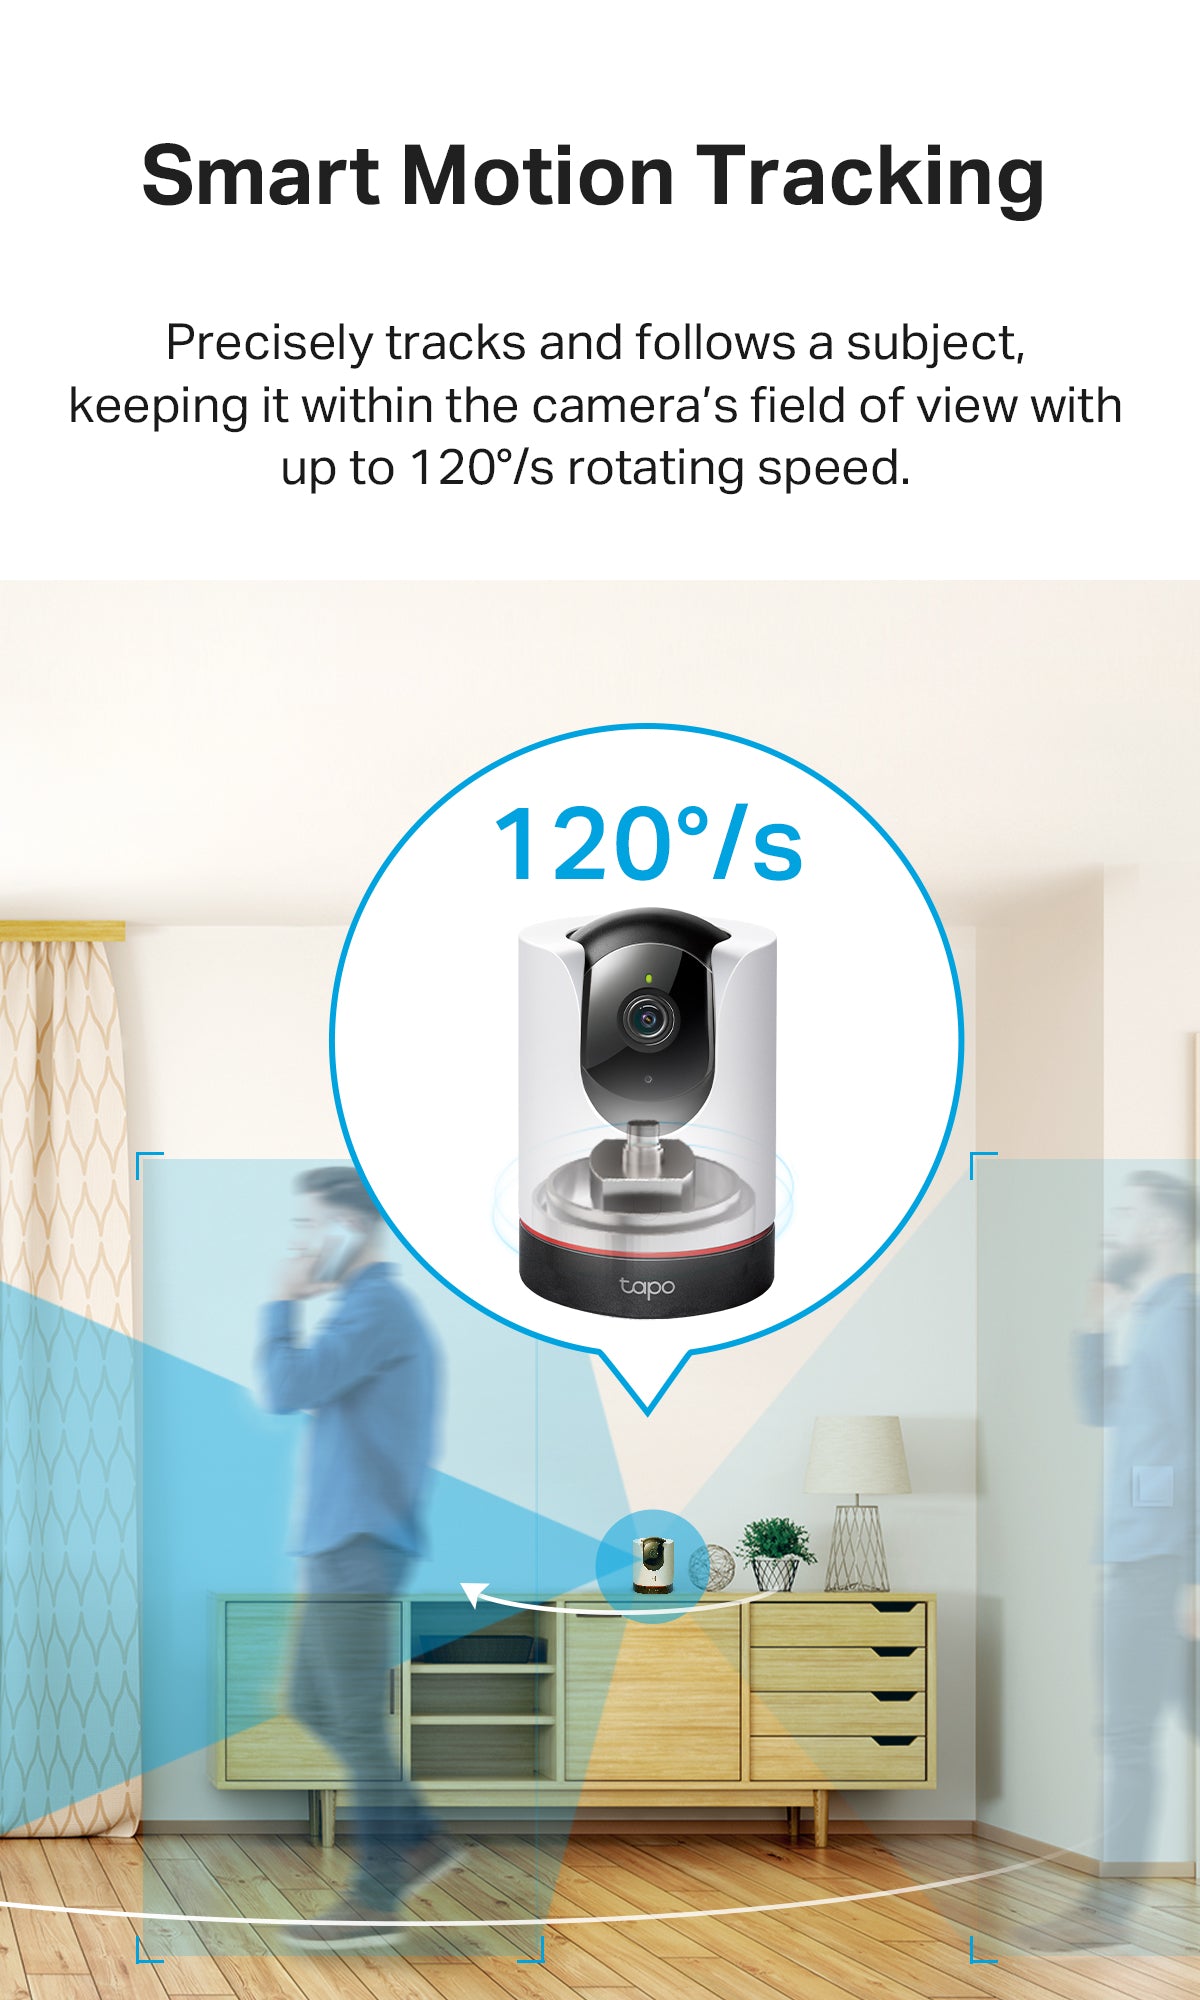 [3 years warranty] TP-Link Tapo CCTV  C210  Full HD 360 Wireless Wifi Home Security IP Camera CCTV